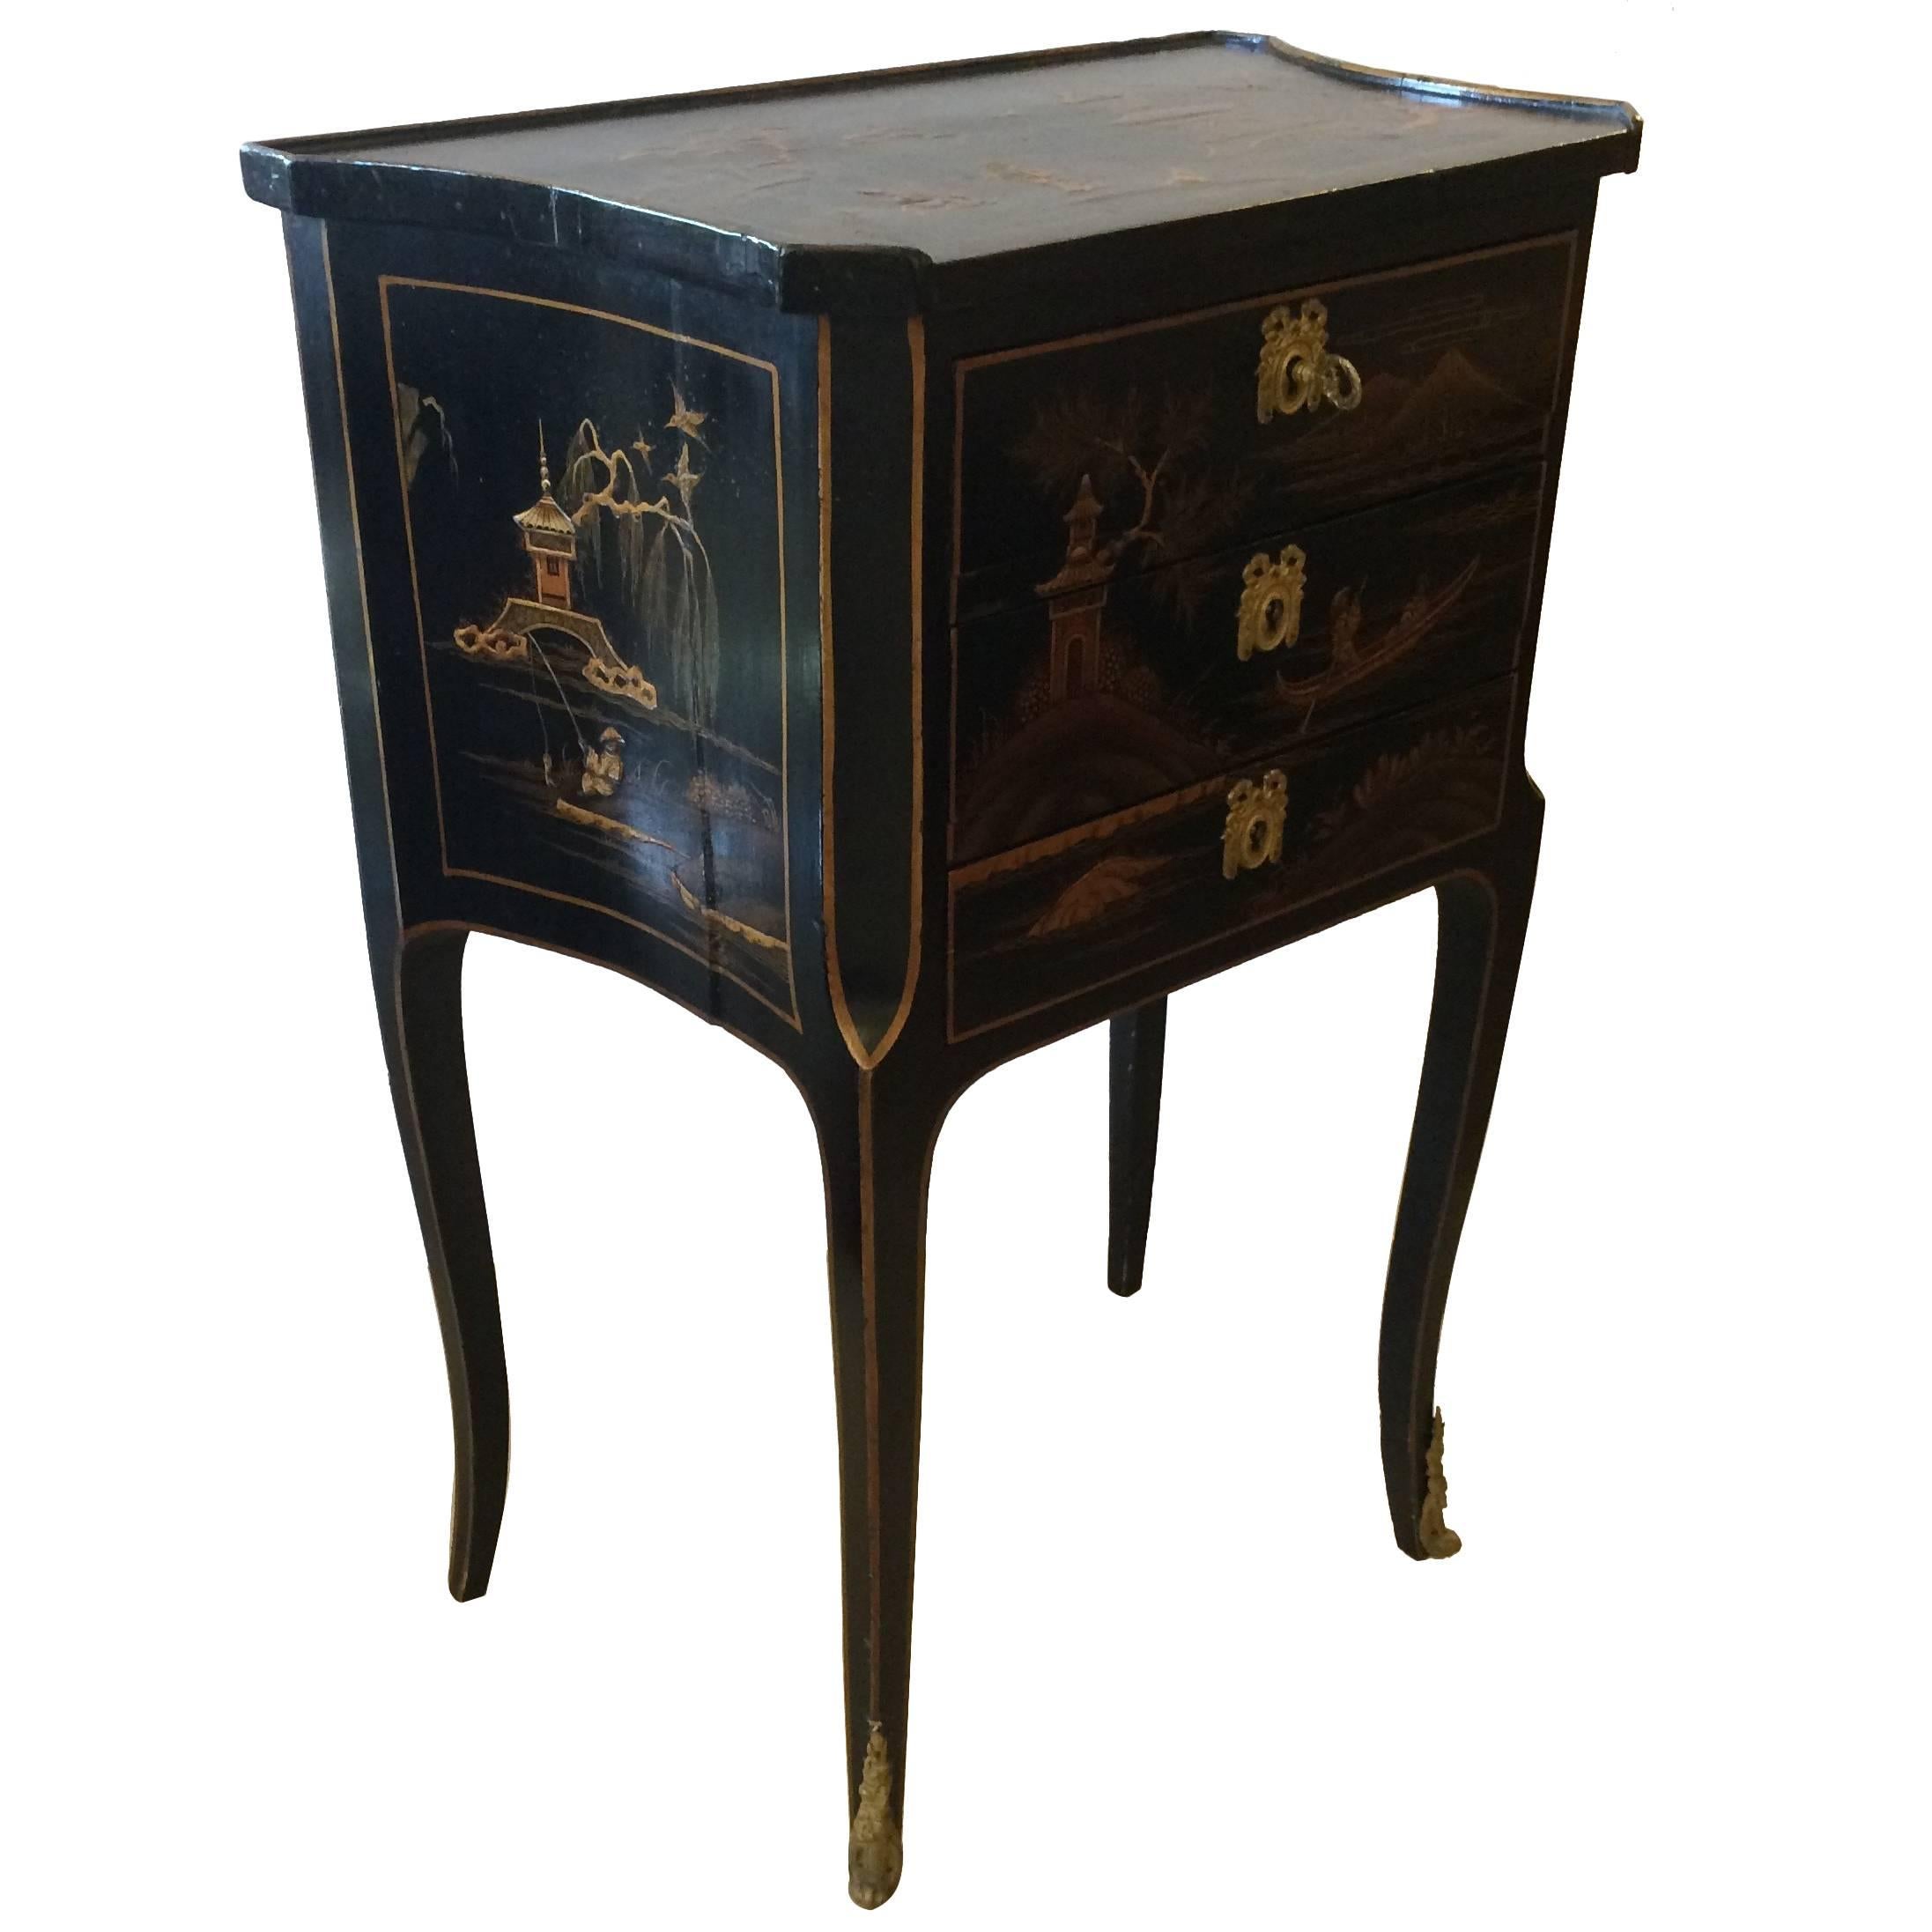 Lovely Antique Chinoiserie Side Table or Night Table with Three Drawers